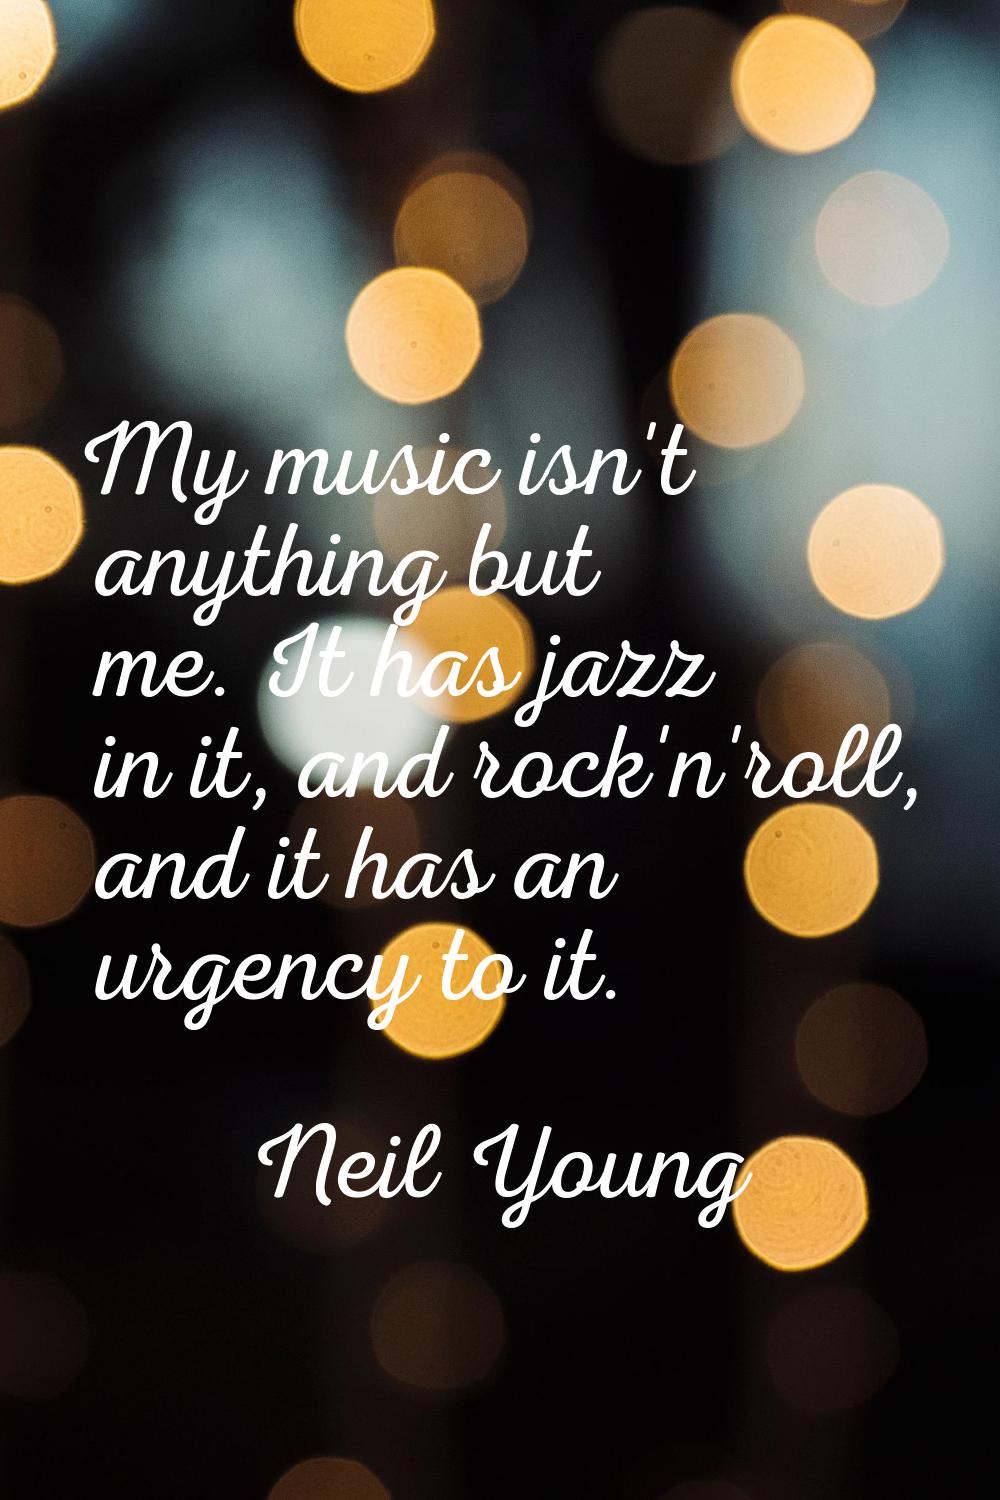 My music isn't anything but me. It has jazz in it, and rock'n'roll, and it has an urgency to it.